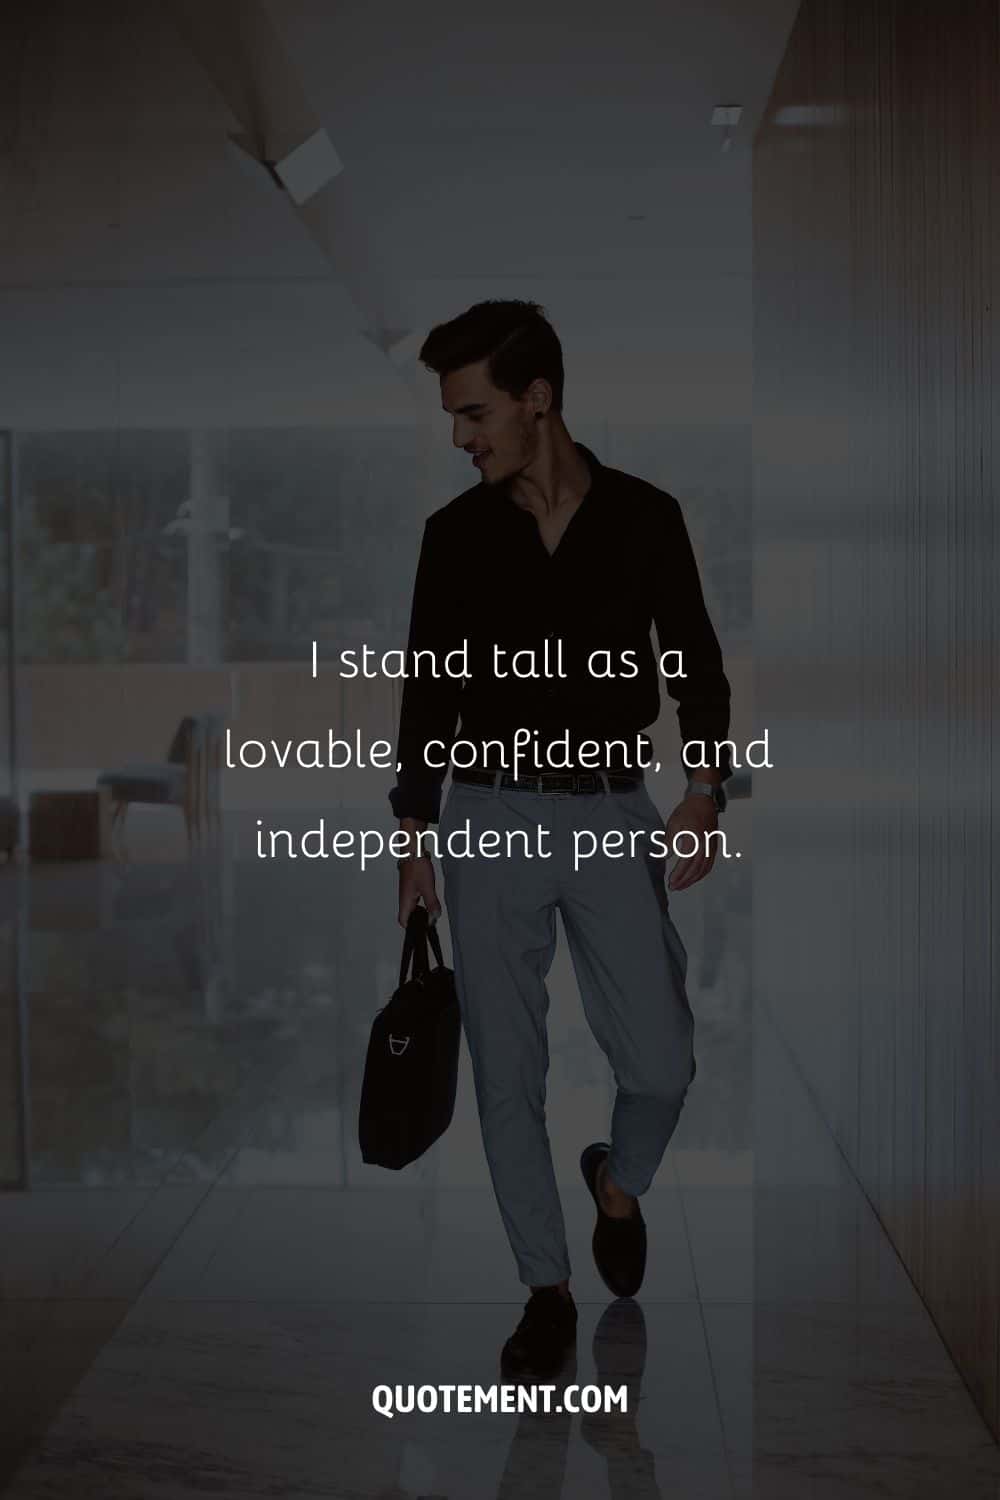 Image of a formal-clothed man representing an affirmation for confidence.